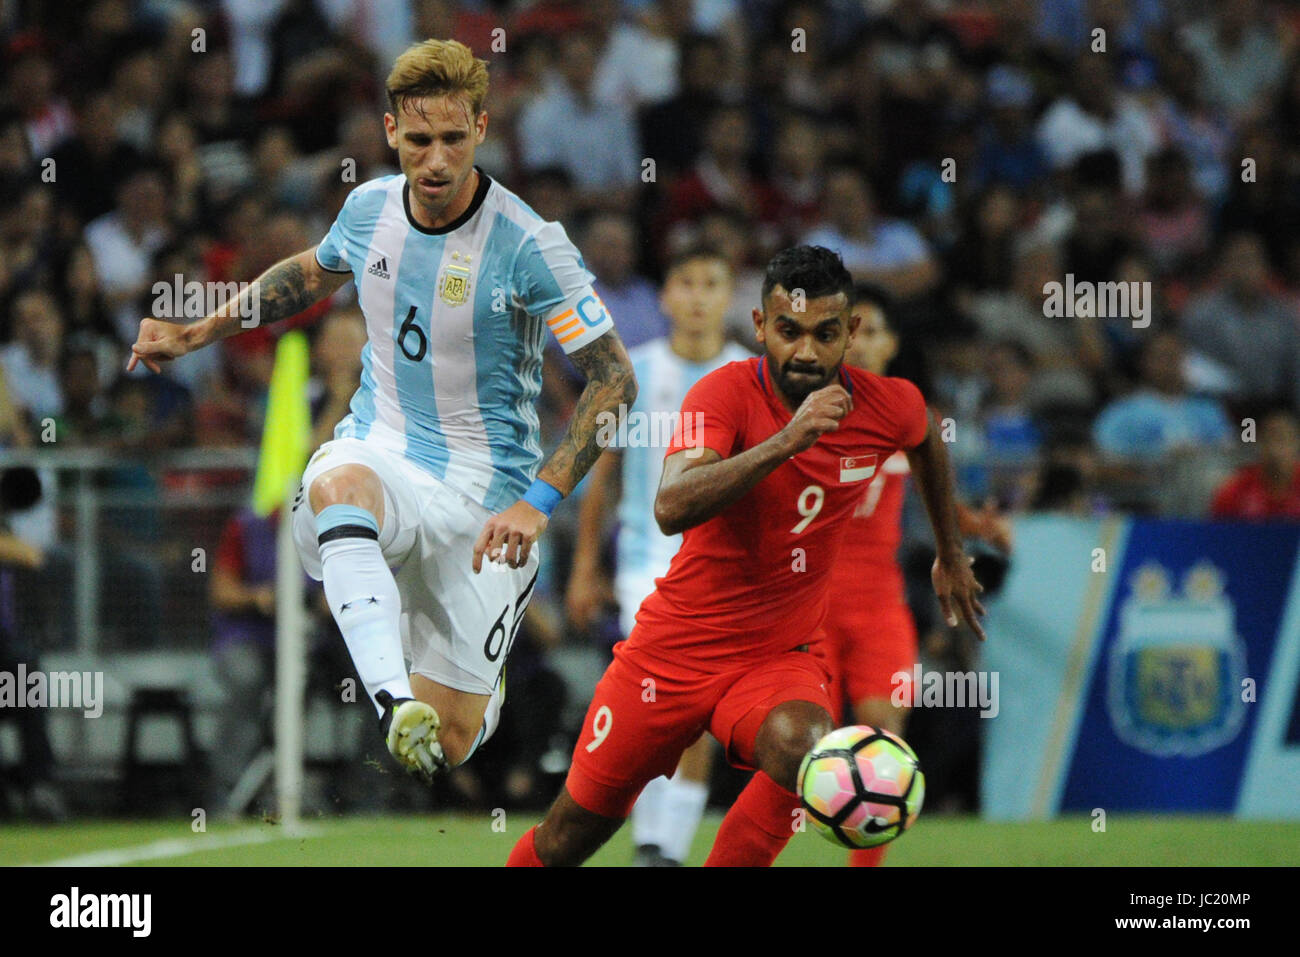 Singapore. 13th June, 2017. Argentina's player Lucas Biglia (L) competes during the international friendly match between Singapore and Argentina held in the National Stadium of Singapore on Jun 13, 2017. Credit: Then Chih Wey/Xinhua/Alamy Live News Stock Photo